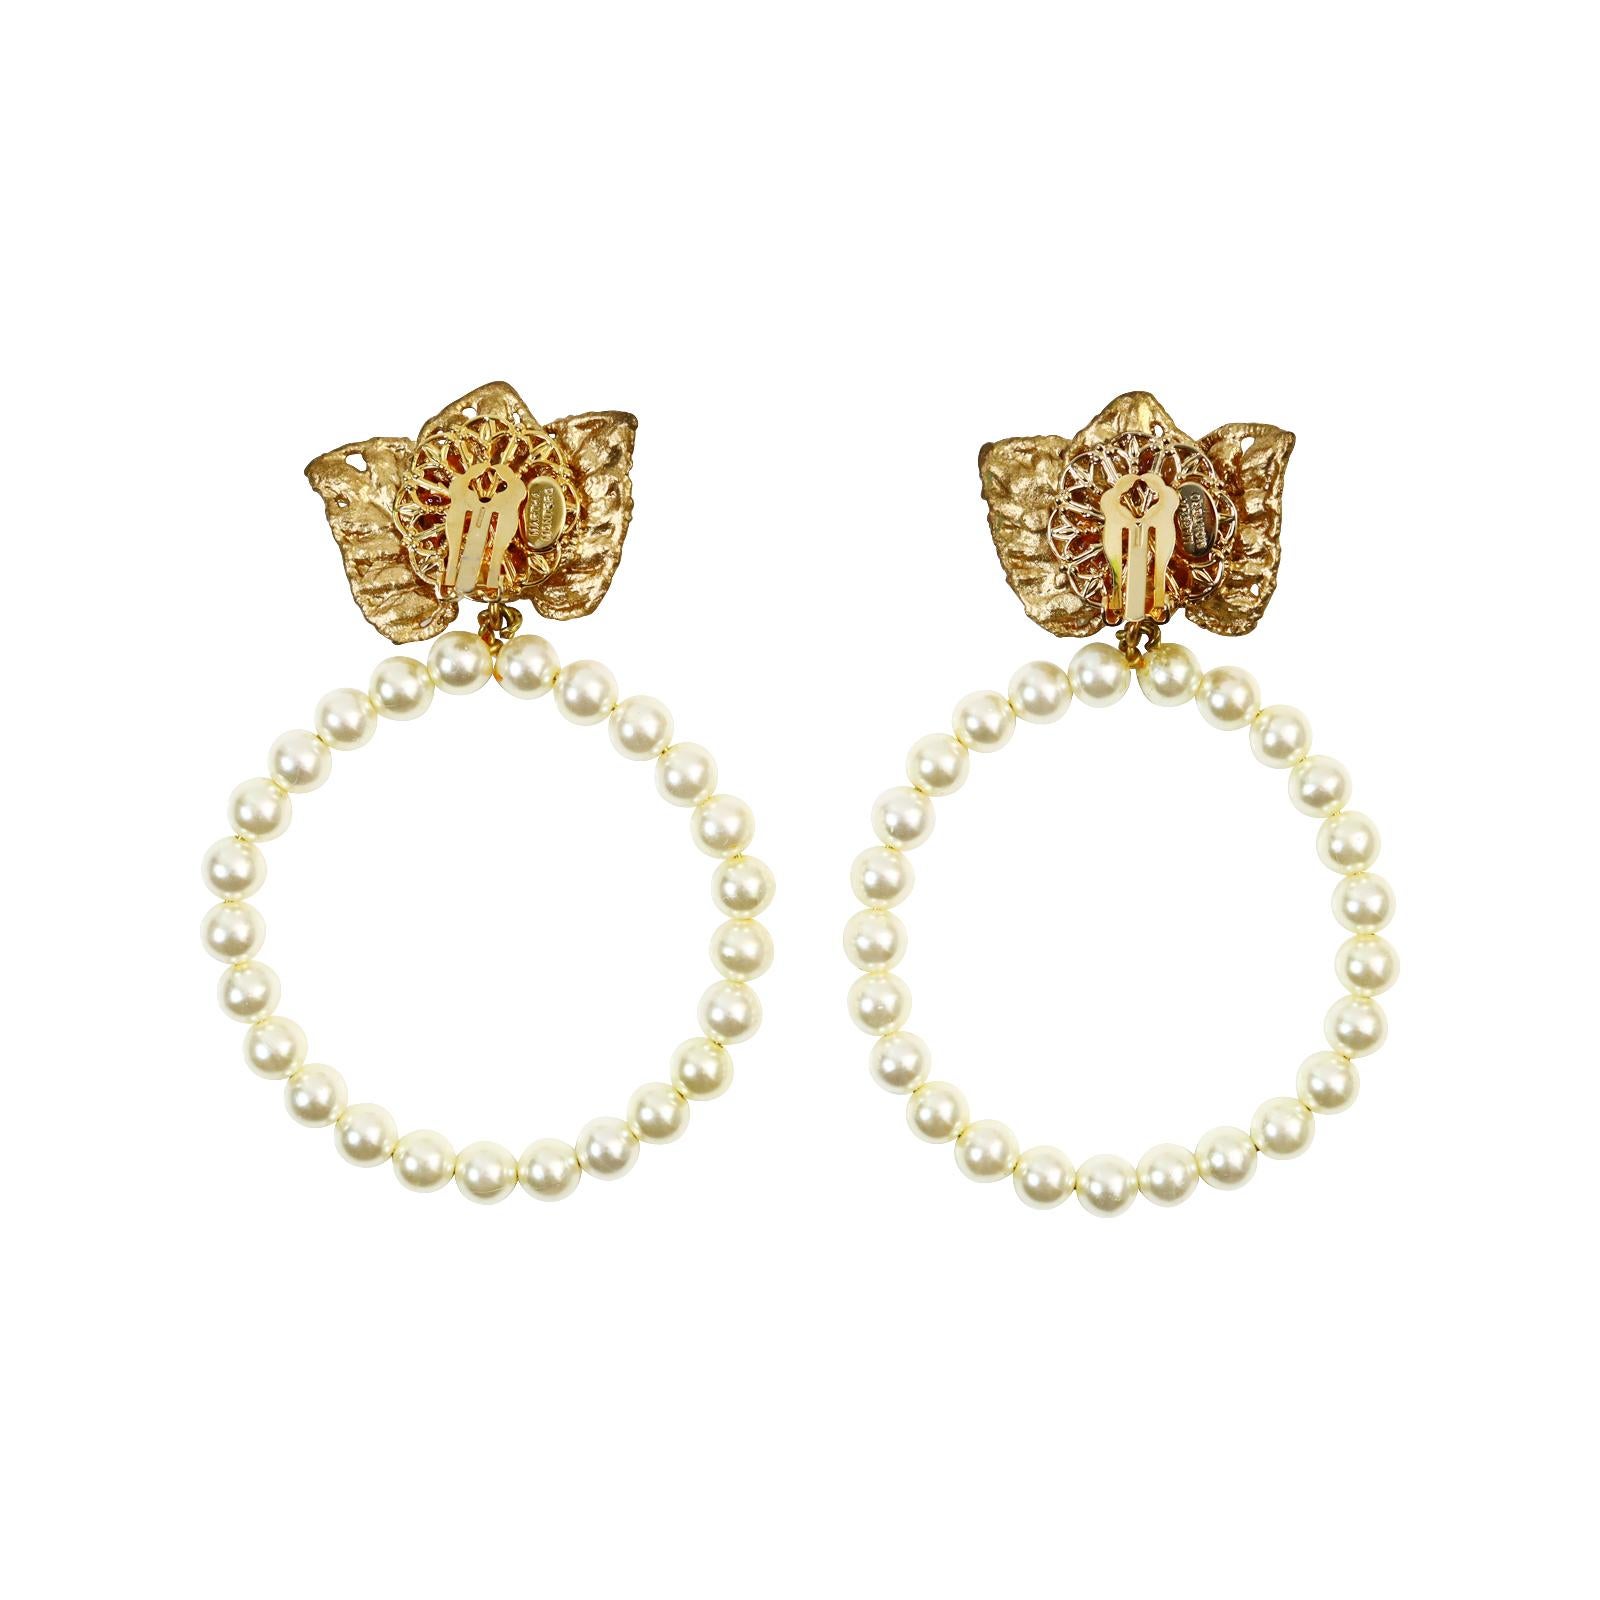 Vintage Martha Montero Gold and Faux Pearl Dangling Hoop Earrings Circa 1980s For Sale 1